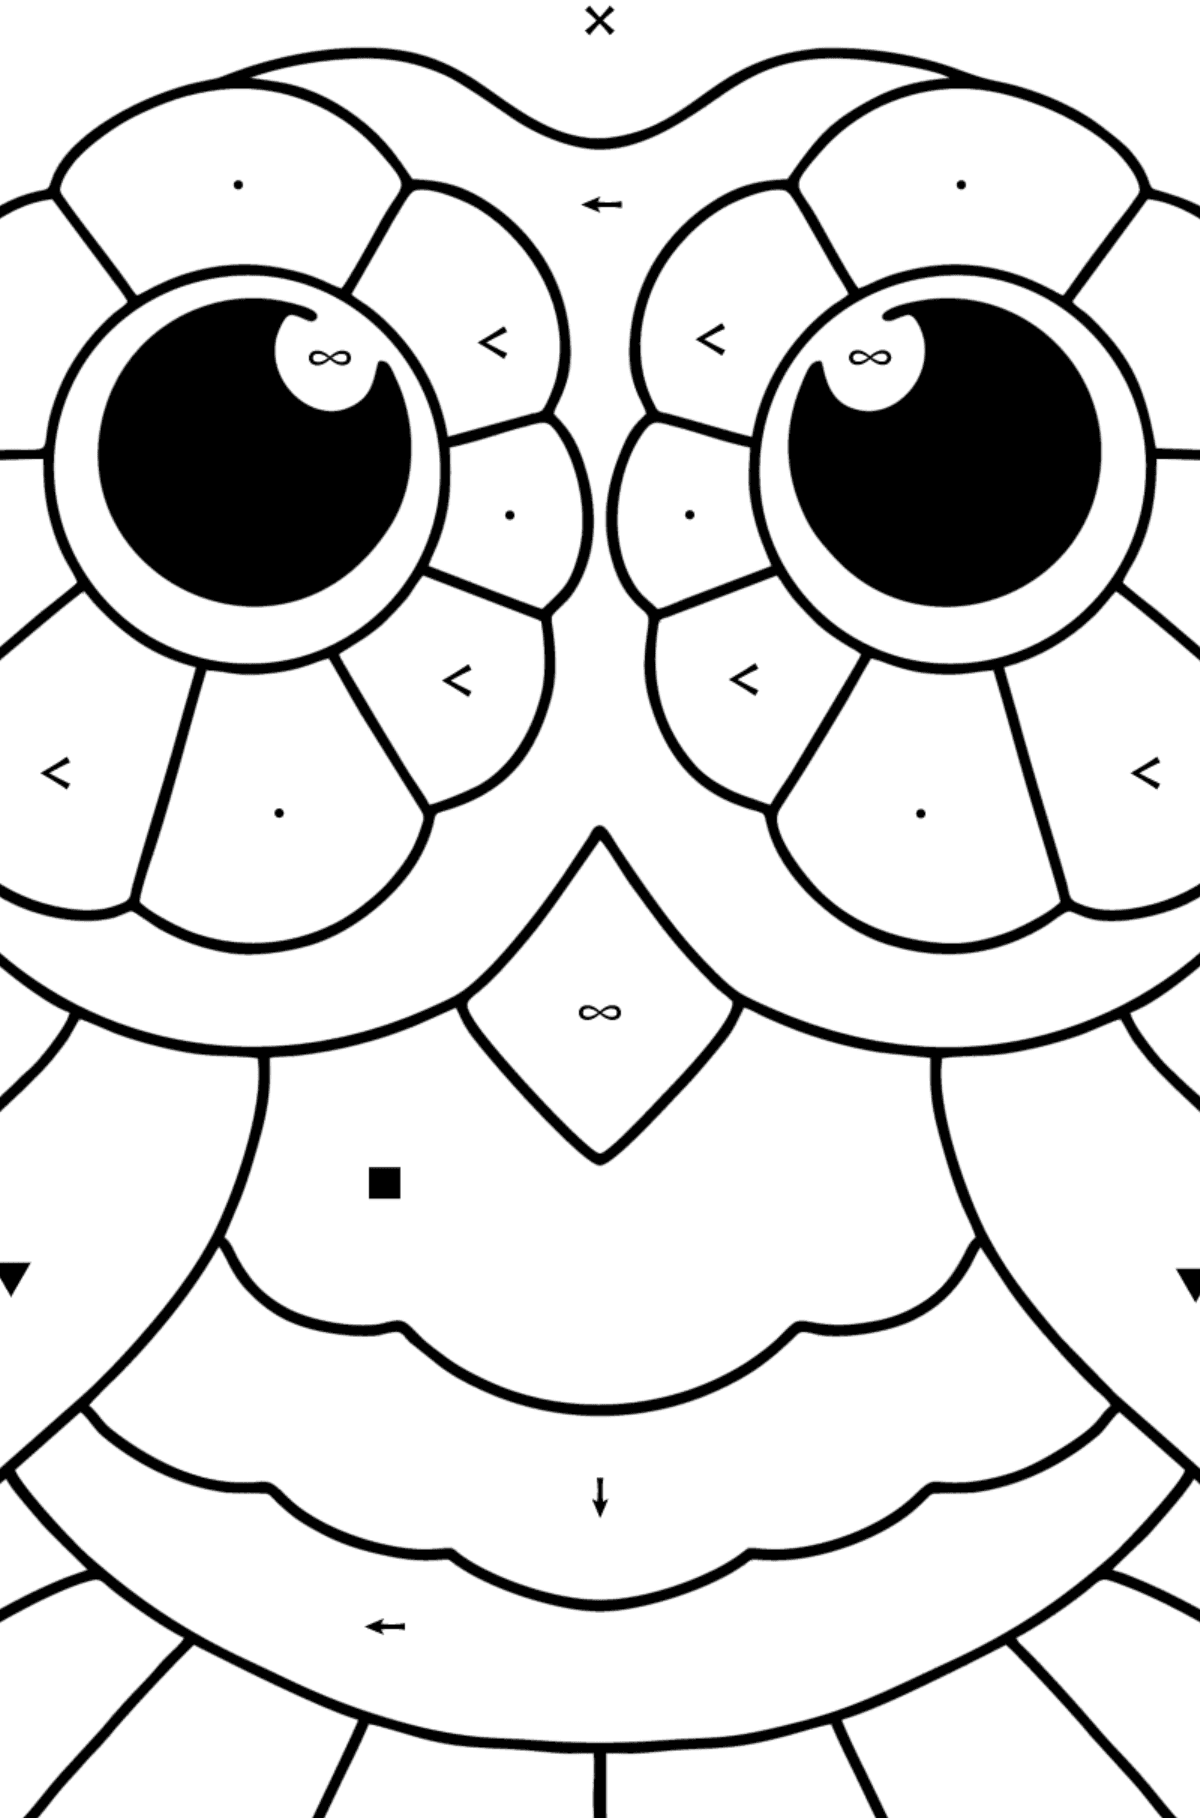 Easy stress relief coloring page - Owl - Coloring by Symbols for Kids